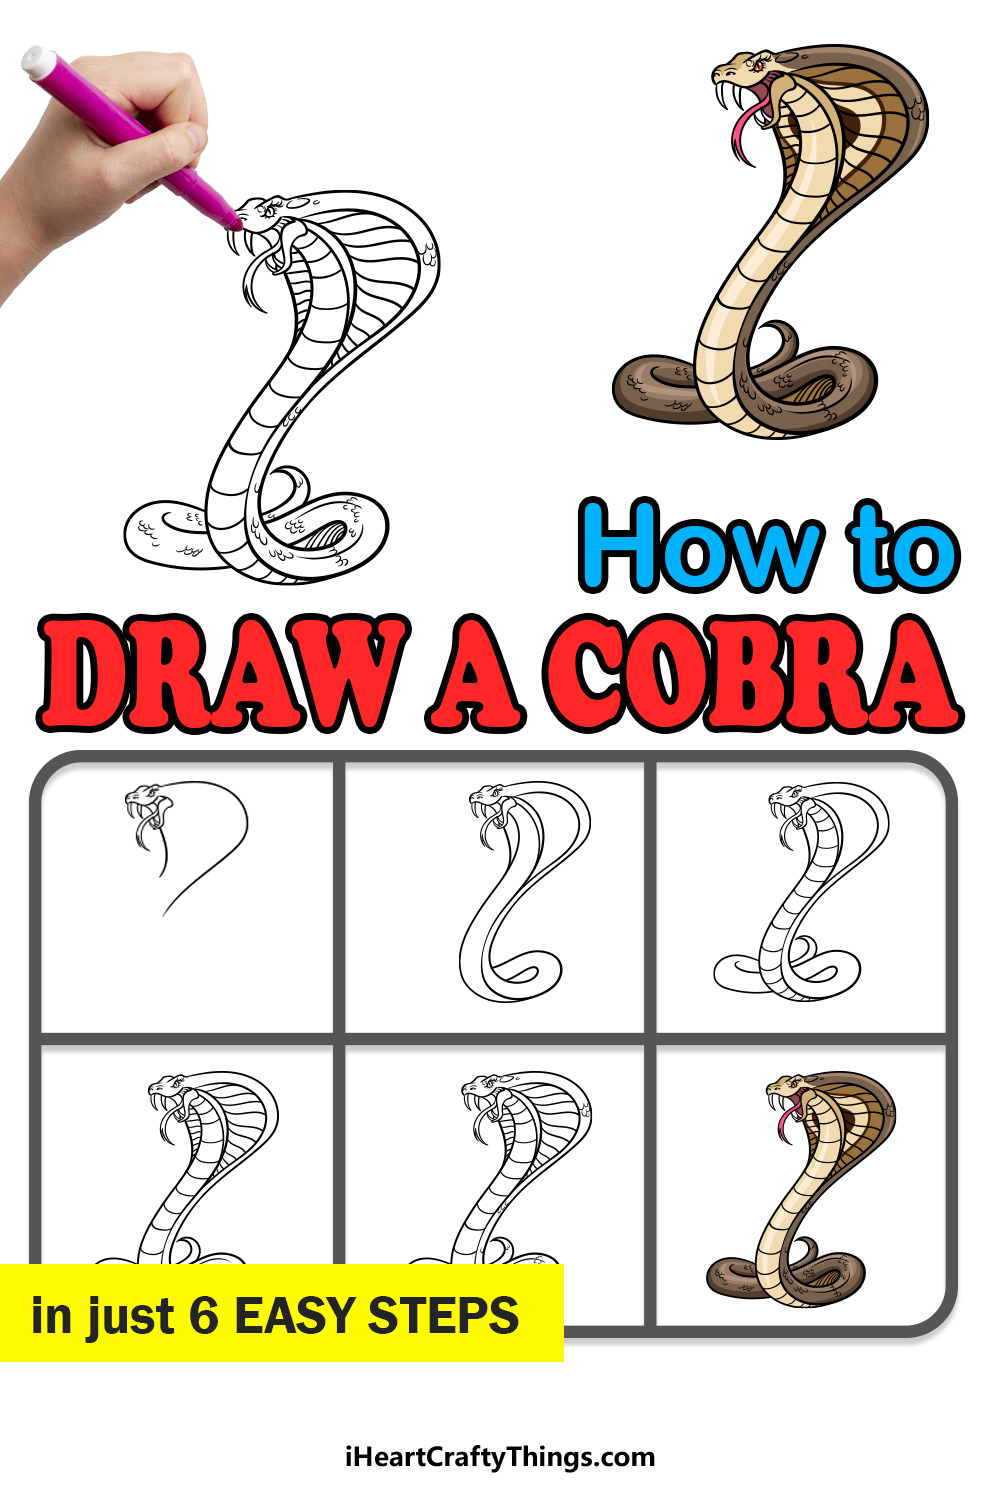 how to draw a cobra in 6 easy steps